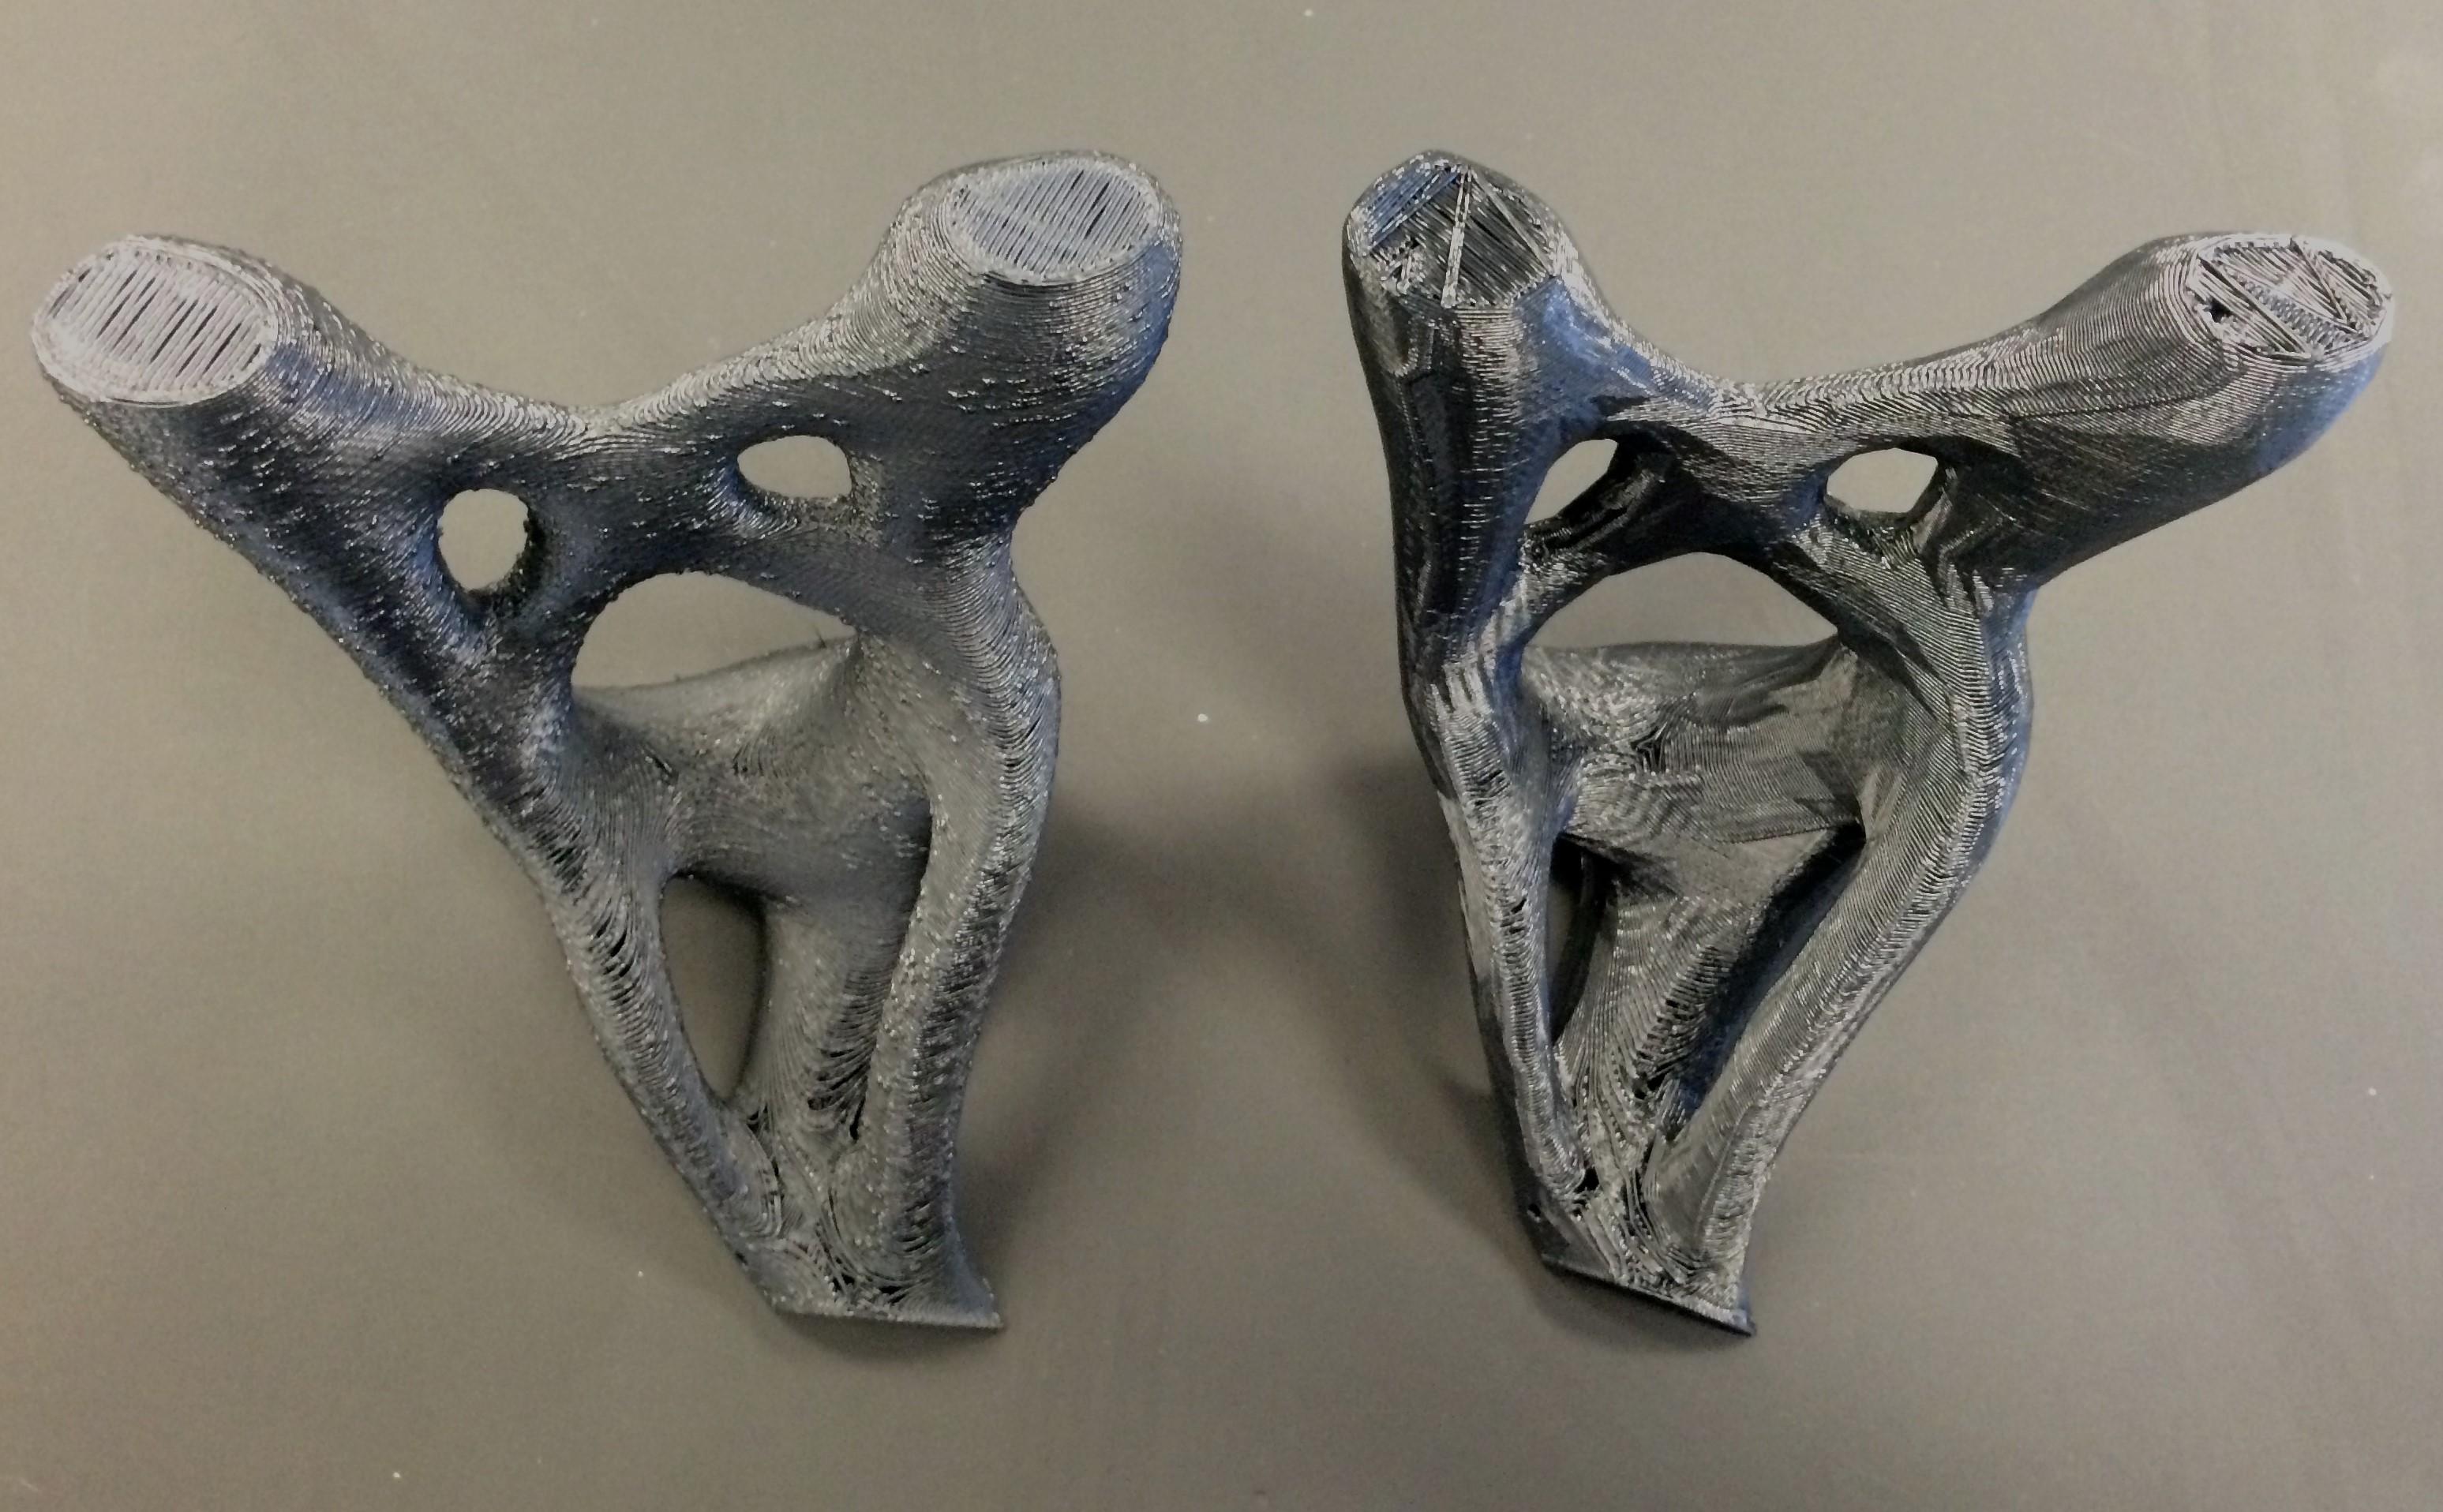 Use Autodesk Meshmixer Improve Quality of Scaled-Down 3D Prints - The Voice of 3D Printing / Additive Manufacturing